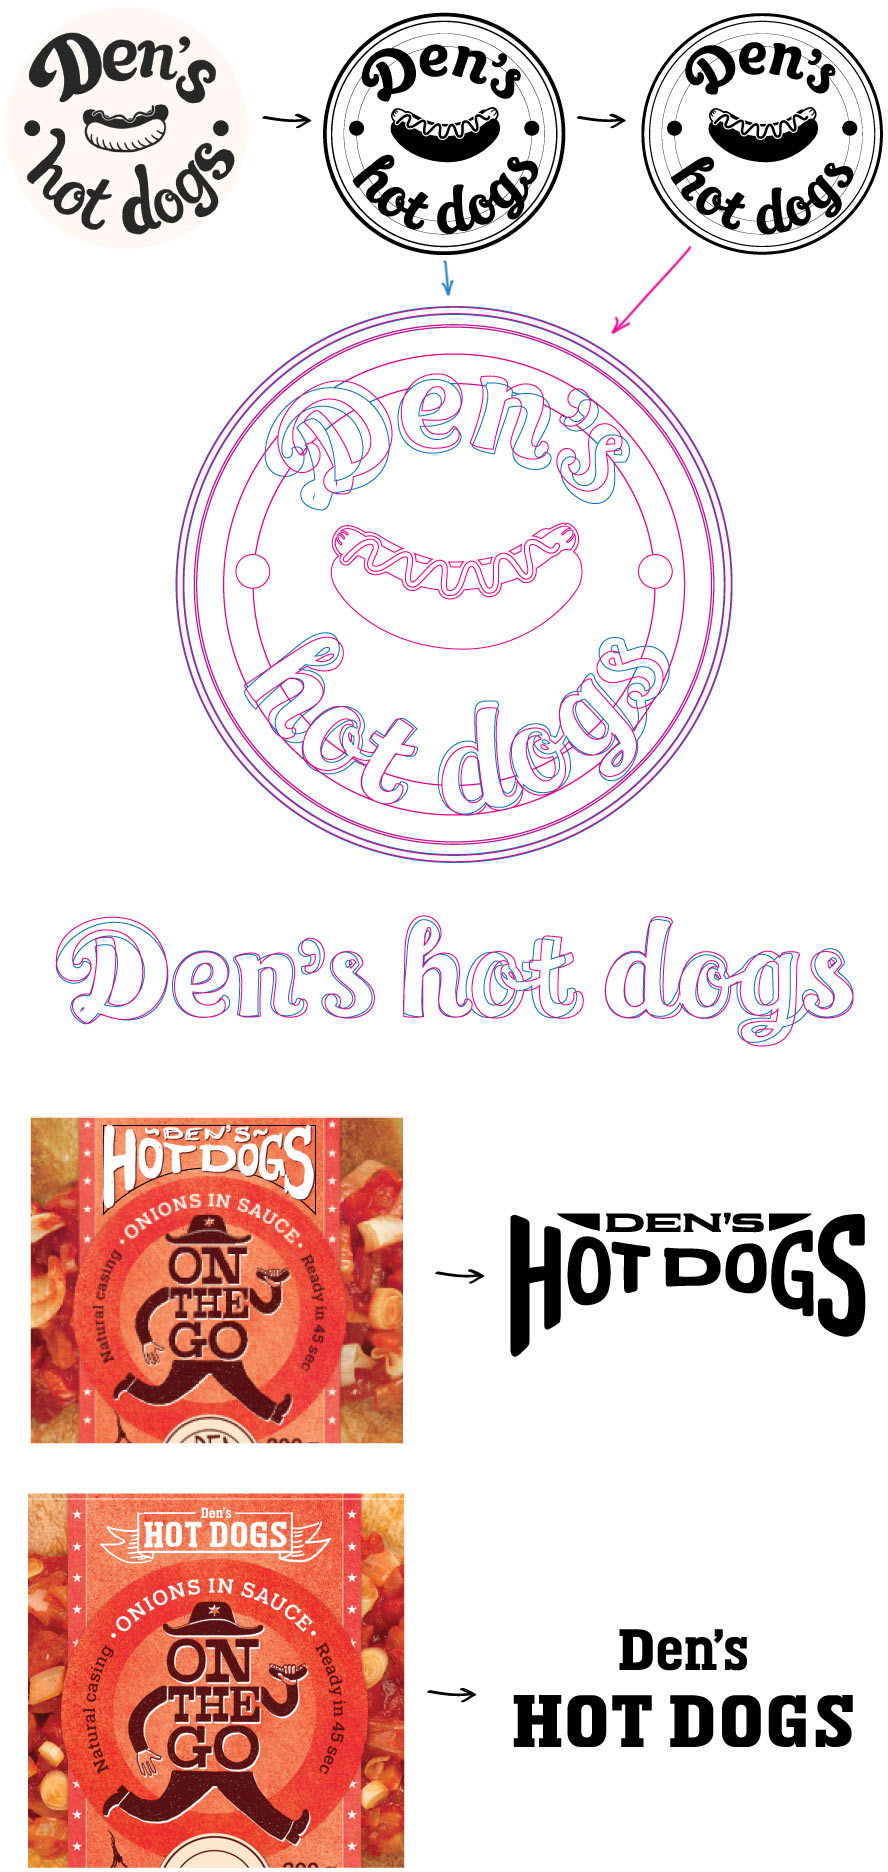 dens hot dogs process 27